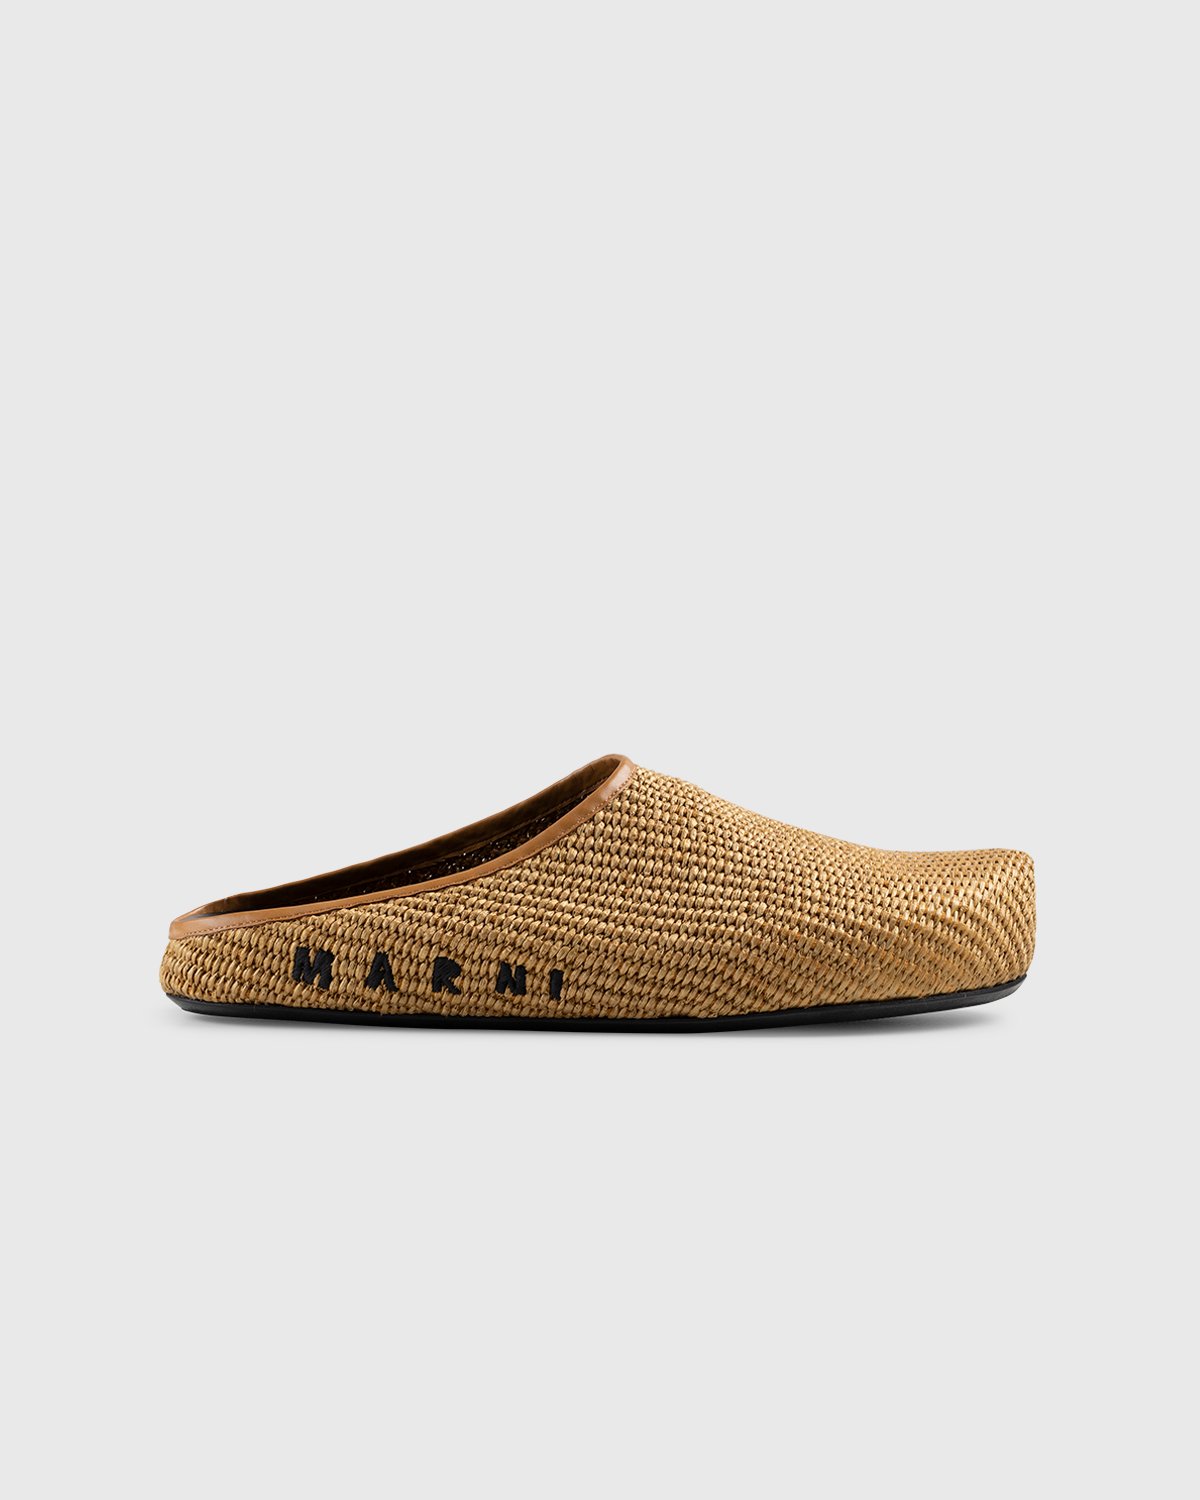 Marni - Woven Raffia and Leather Mules Brown/Black - Footwear - Brown - Image 1